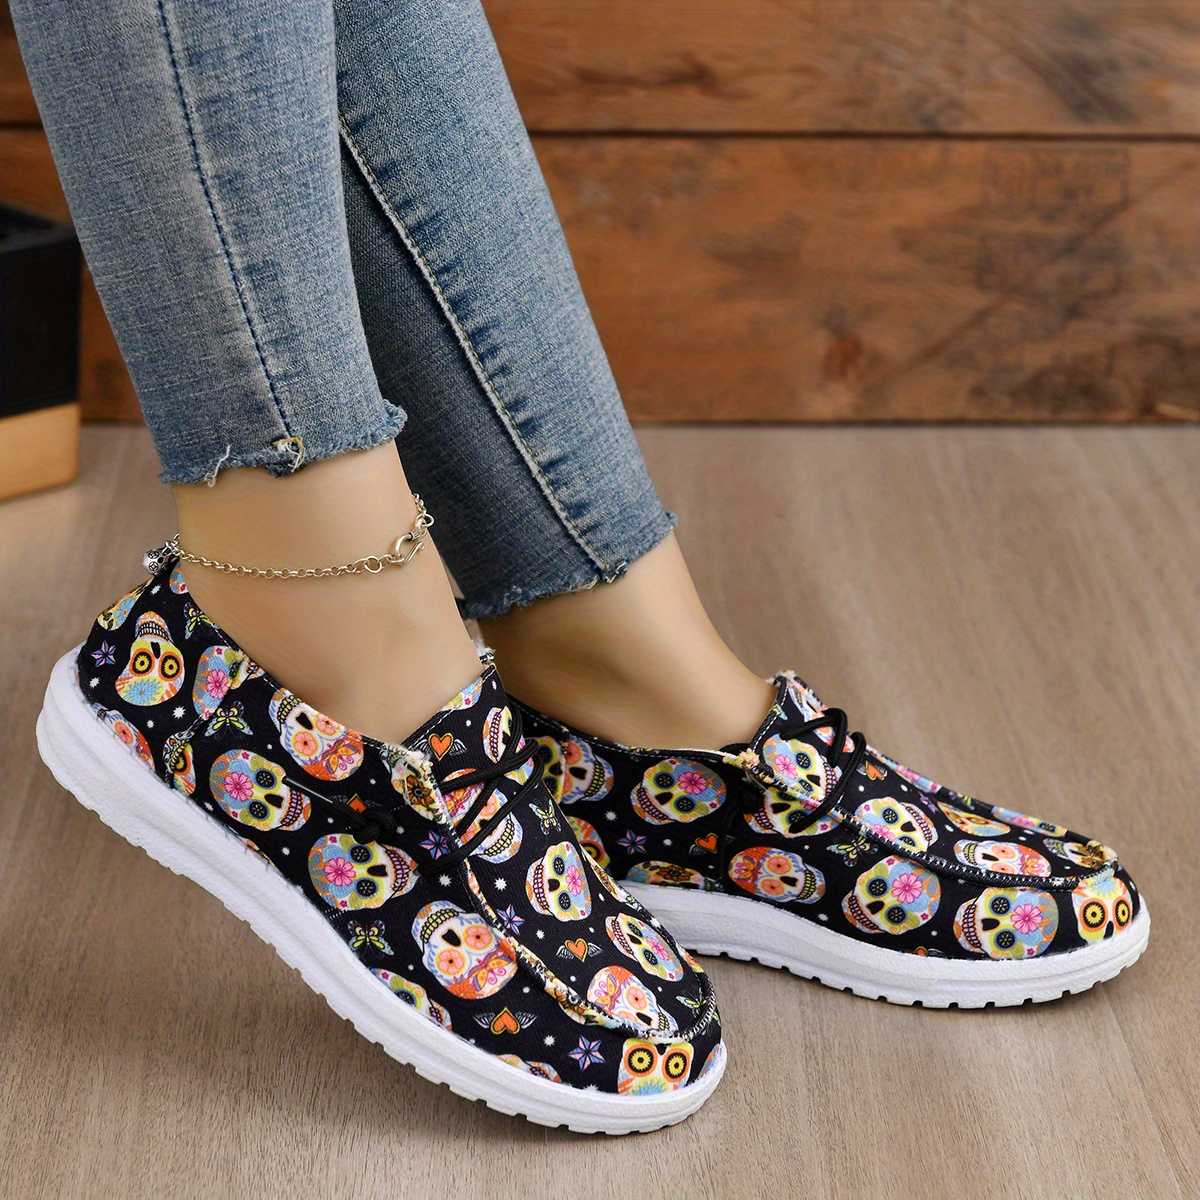 Blackpink Canvas Shoes For Women Causal Wear High Heel Lace Up